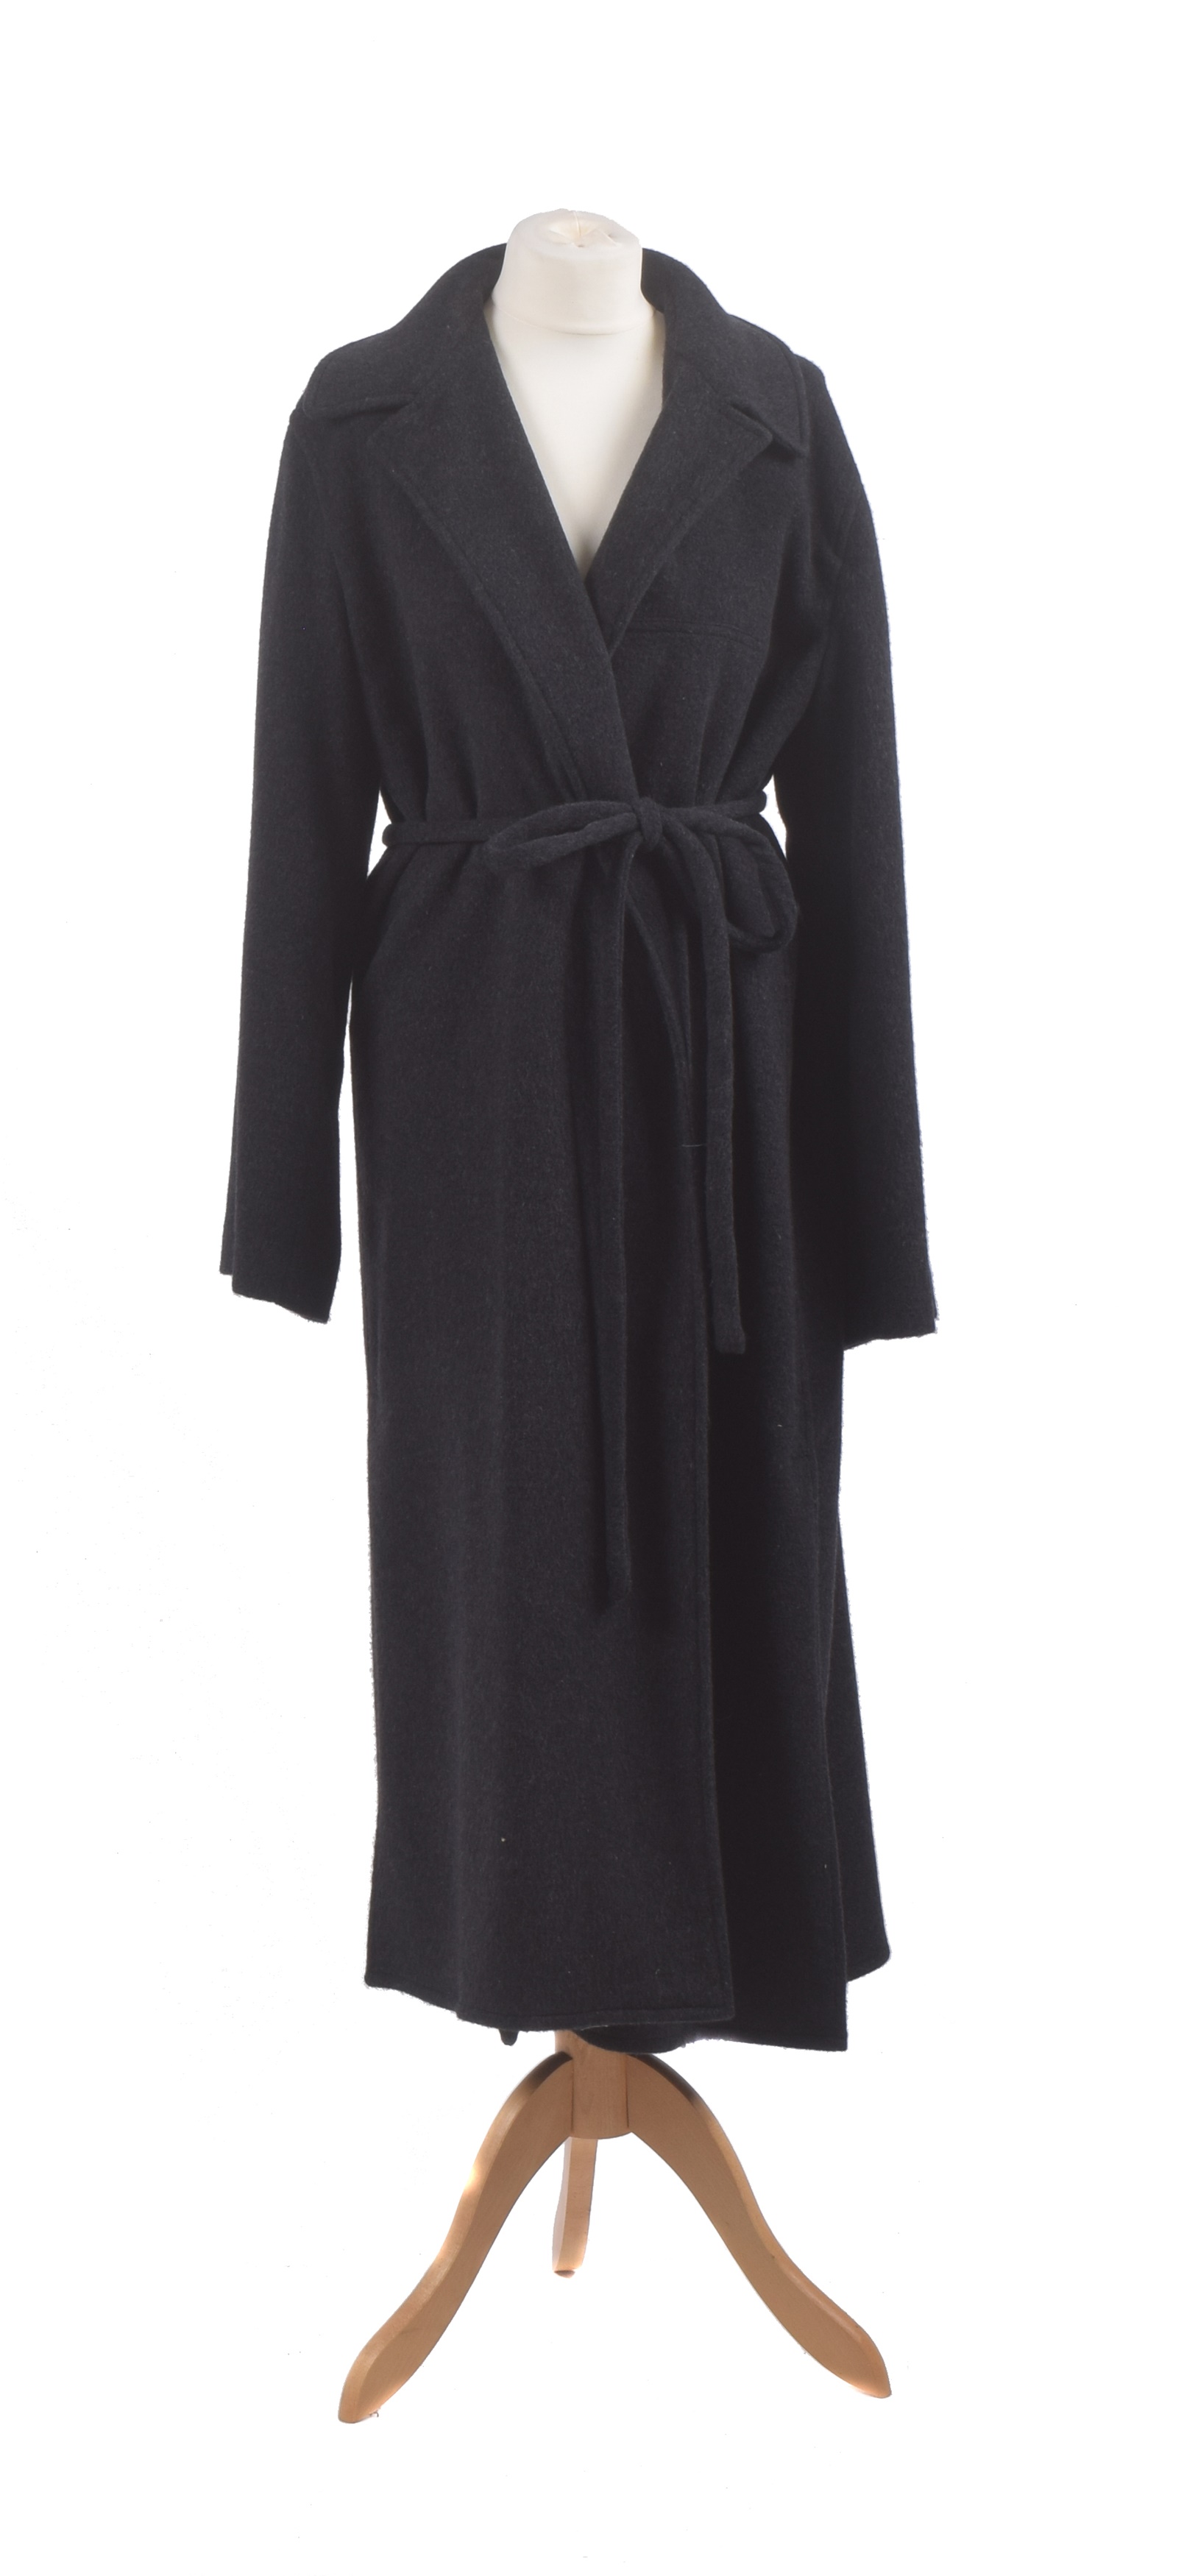 Lot 126 - A wool coat by Emporio Armani,